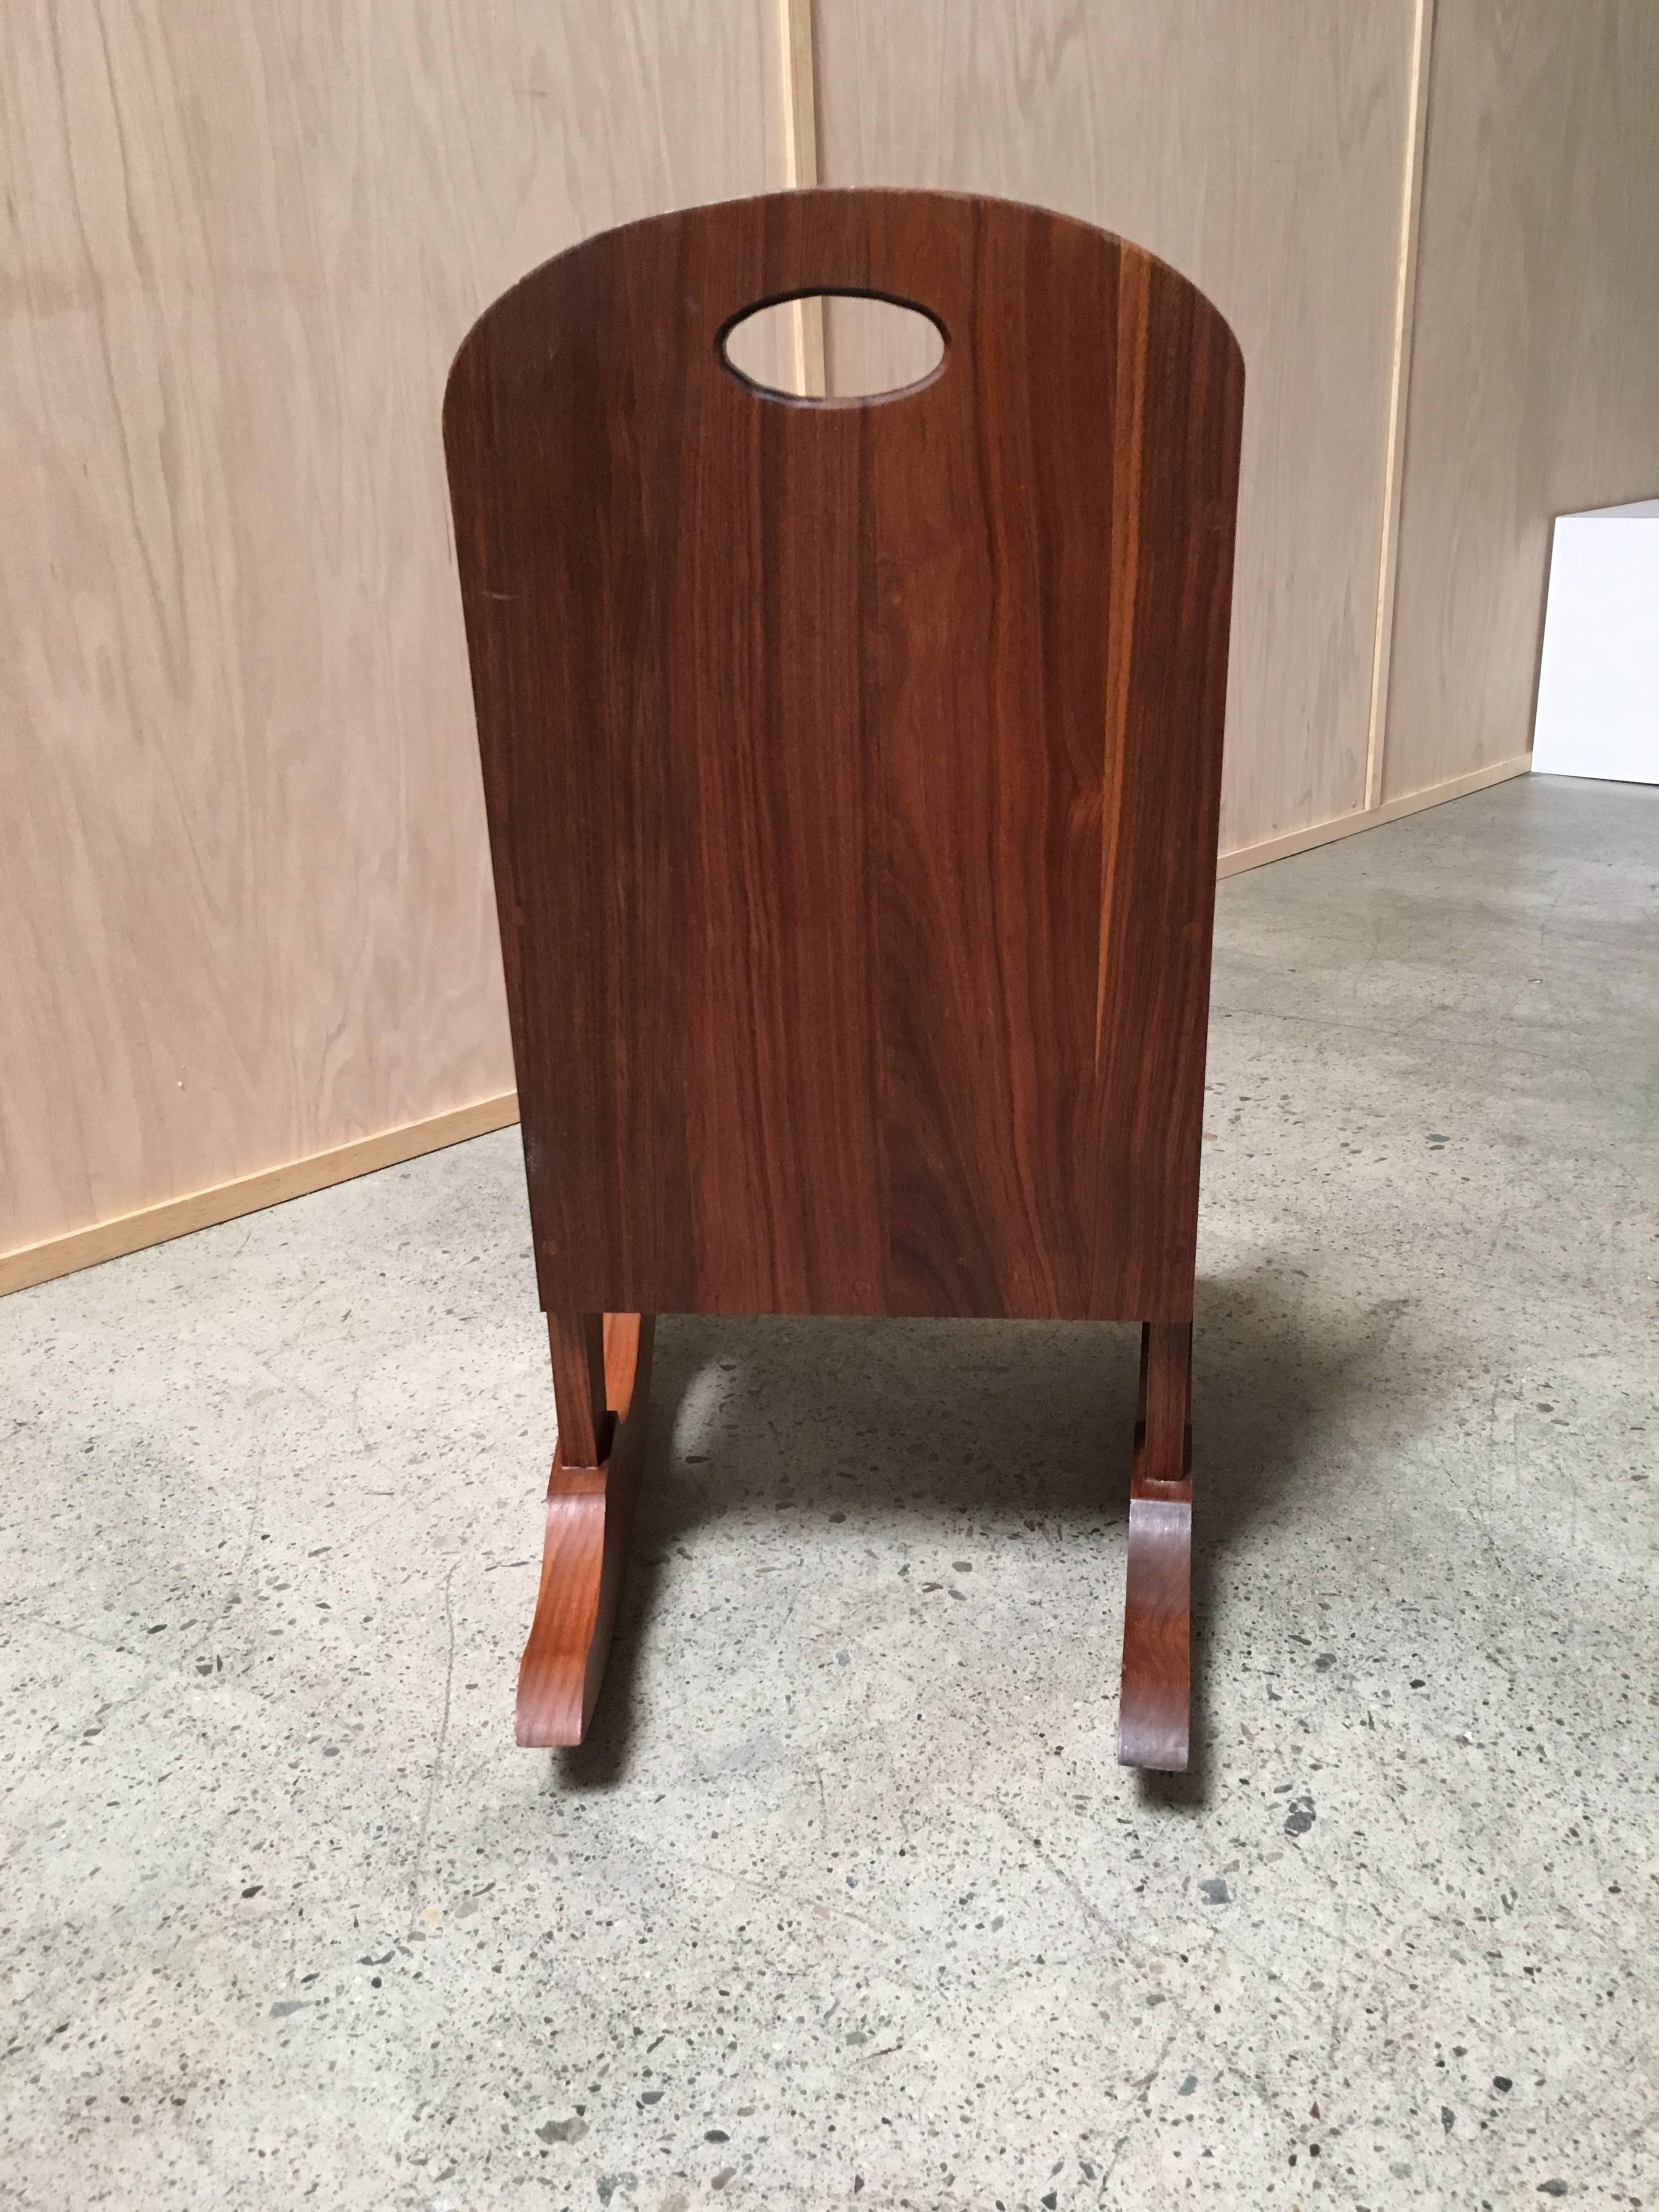 Studio crafted childs rocking chair in solid walnut by Bill Lucy.